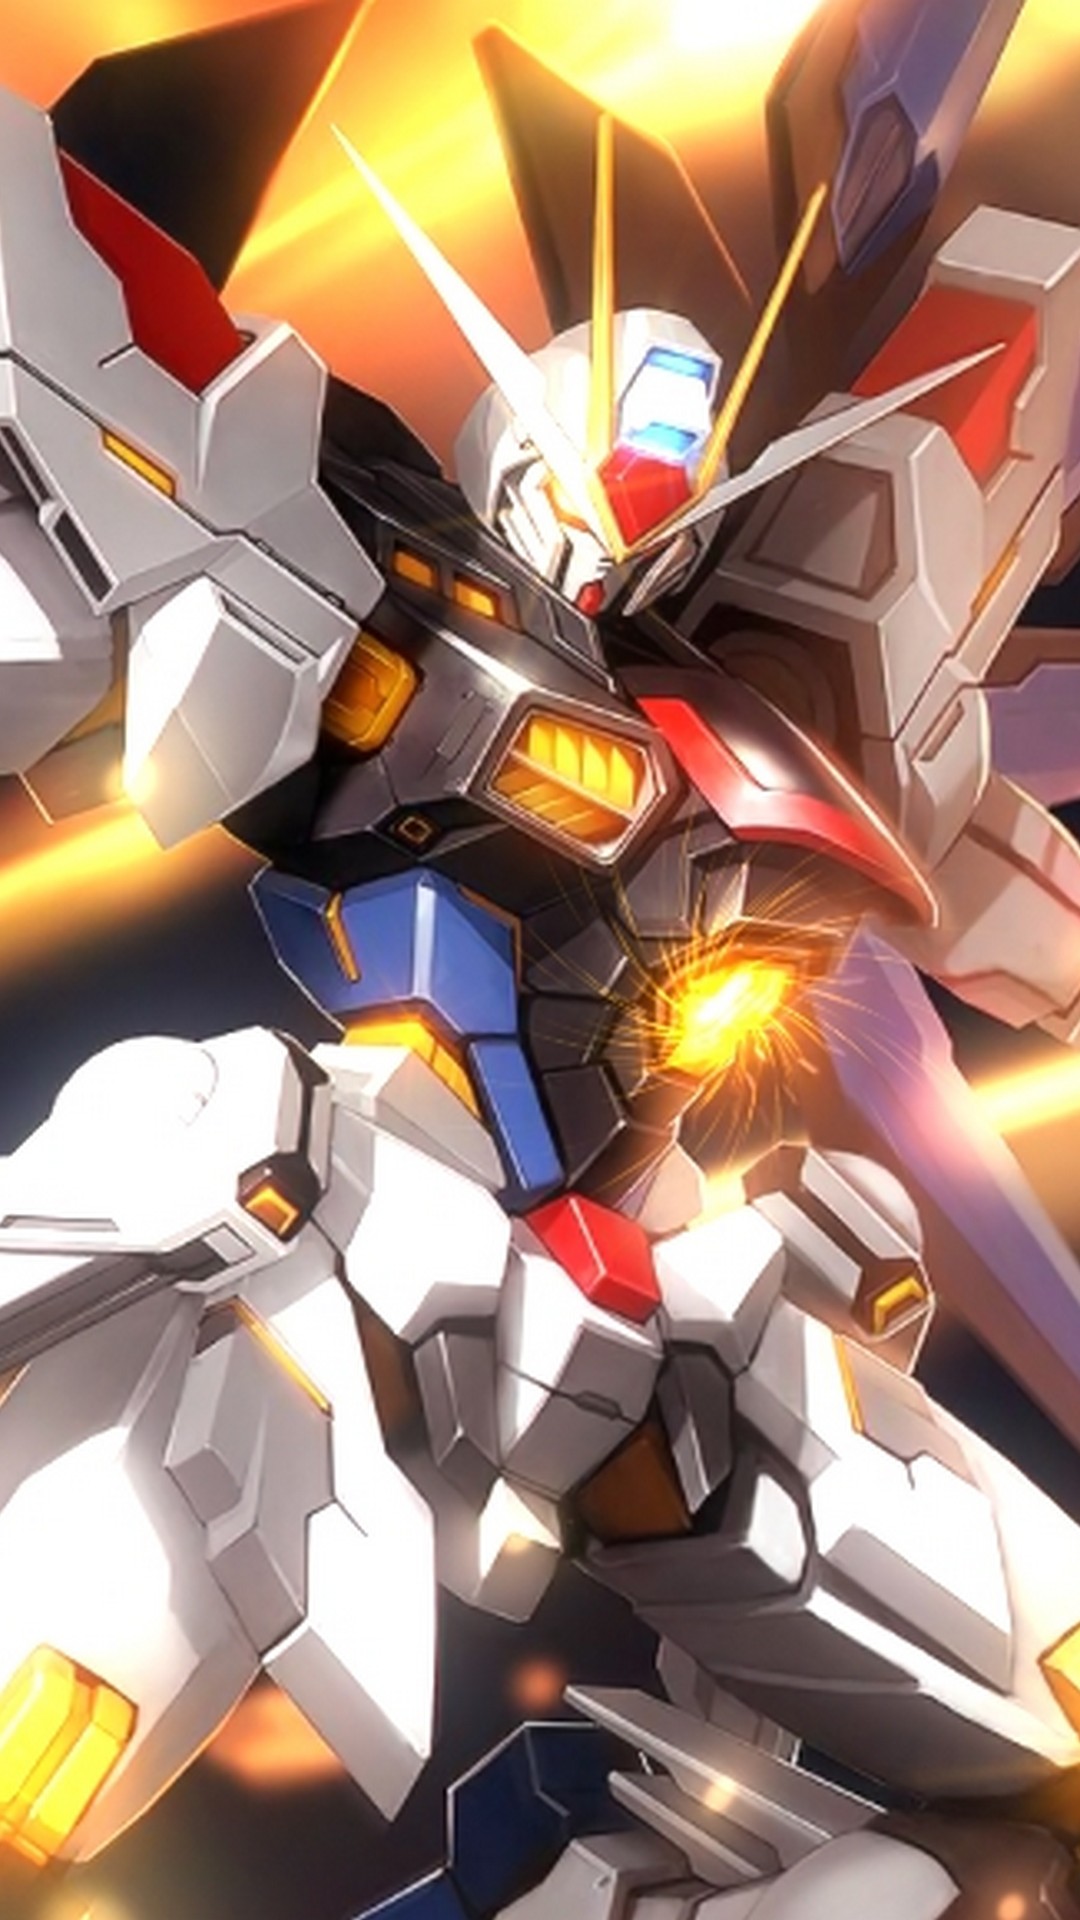 Gundam Phone 8 Wallpaper with high-resolution 1080x1920 pixel. Download all Mobile Wallpapers and Use them as wallpapers for your iPhone, Tablet, iPad, Android and other mobile devices